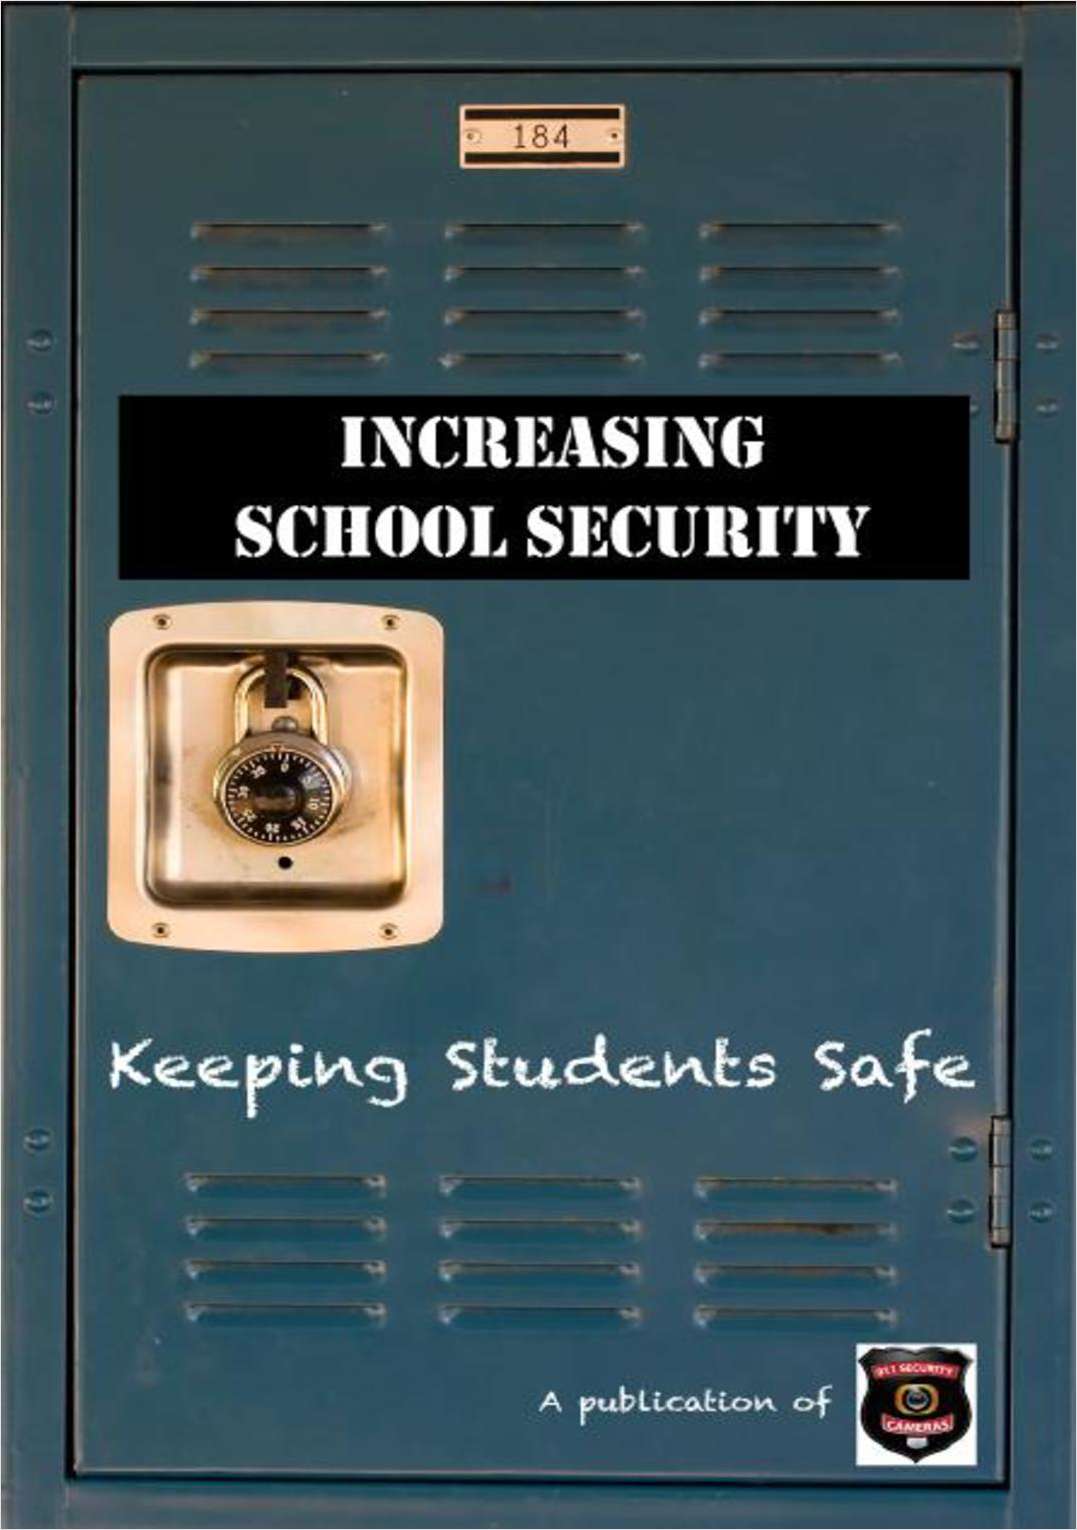 Increasing School Security with Access Control